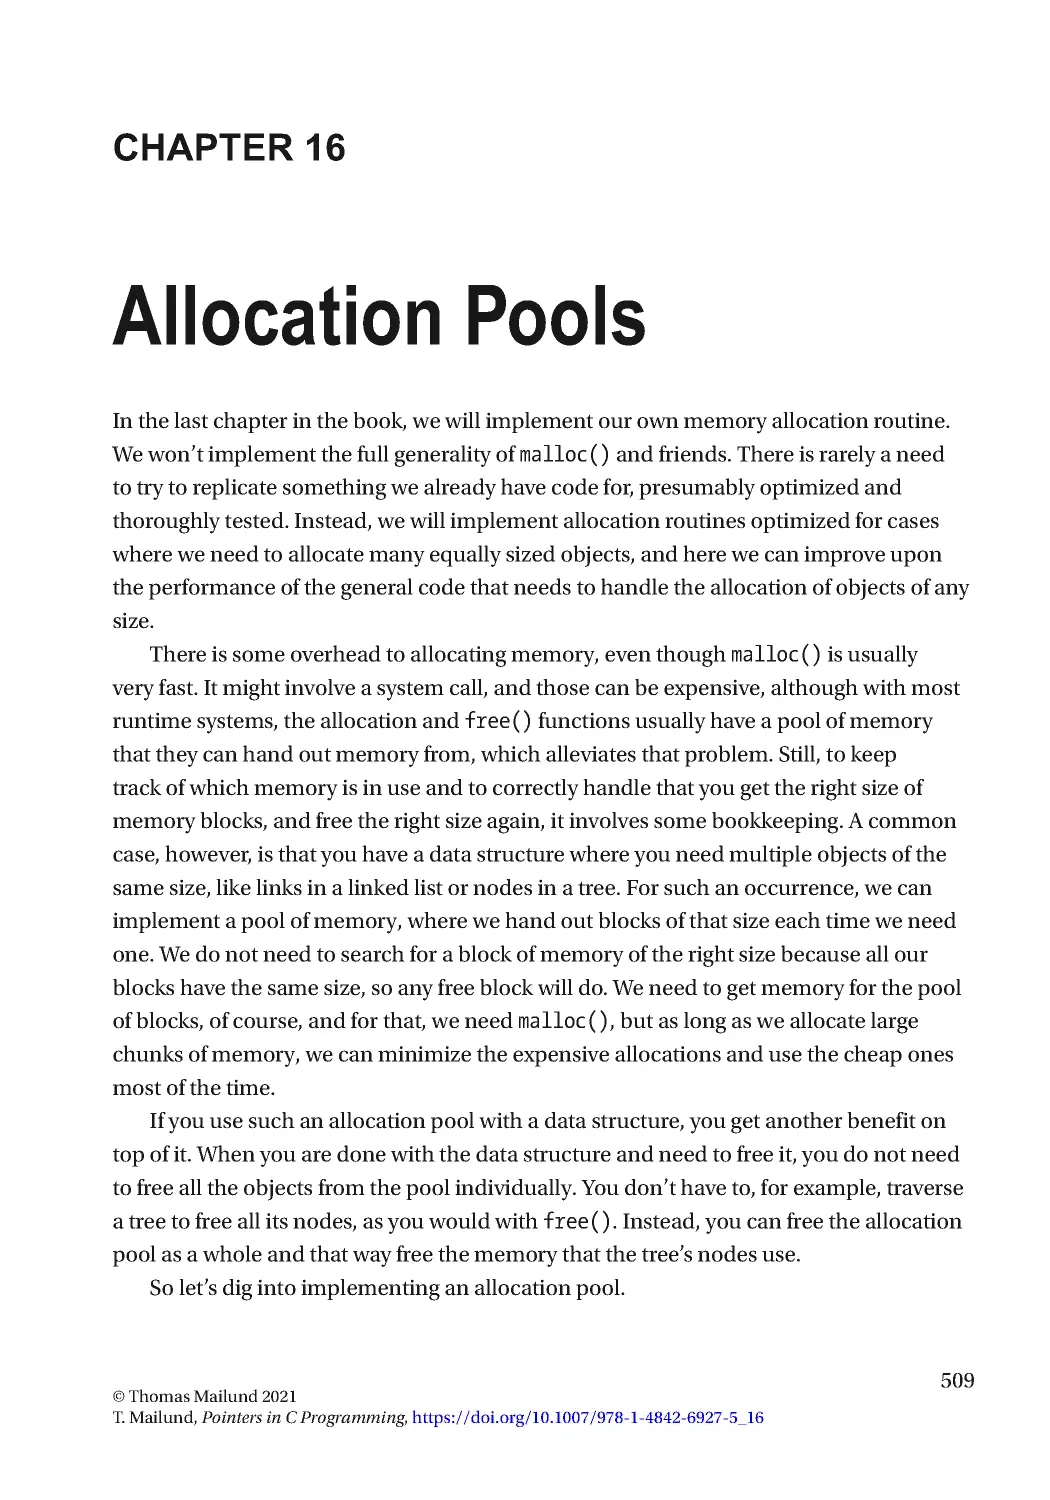 Chapter 16: Allocation Pools